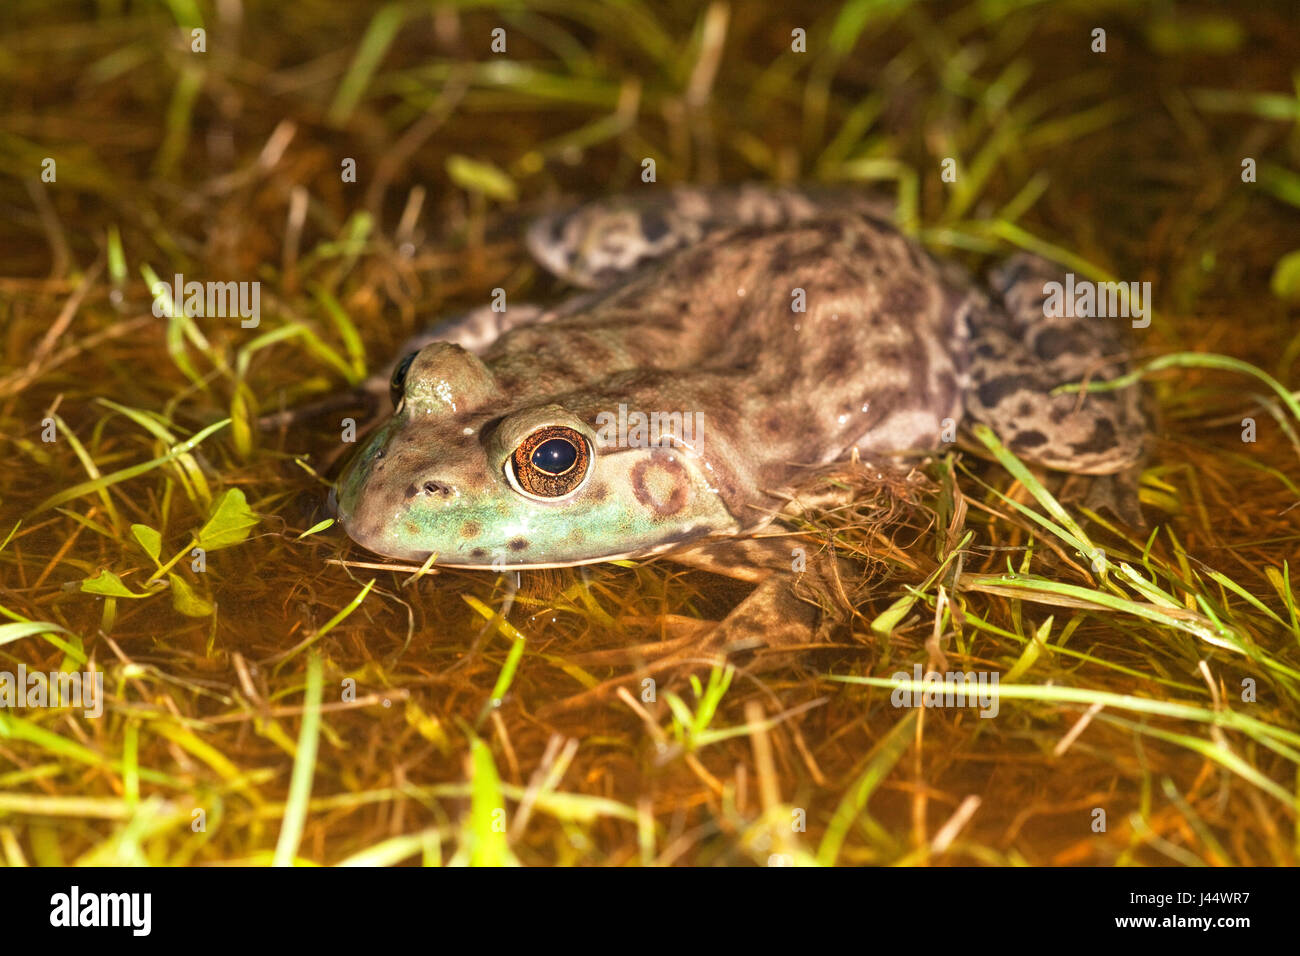 Photo of a North American Bullfrog sitting in a shallow rainpond on grass Stock Photo